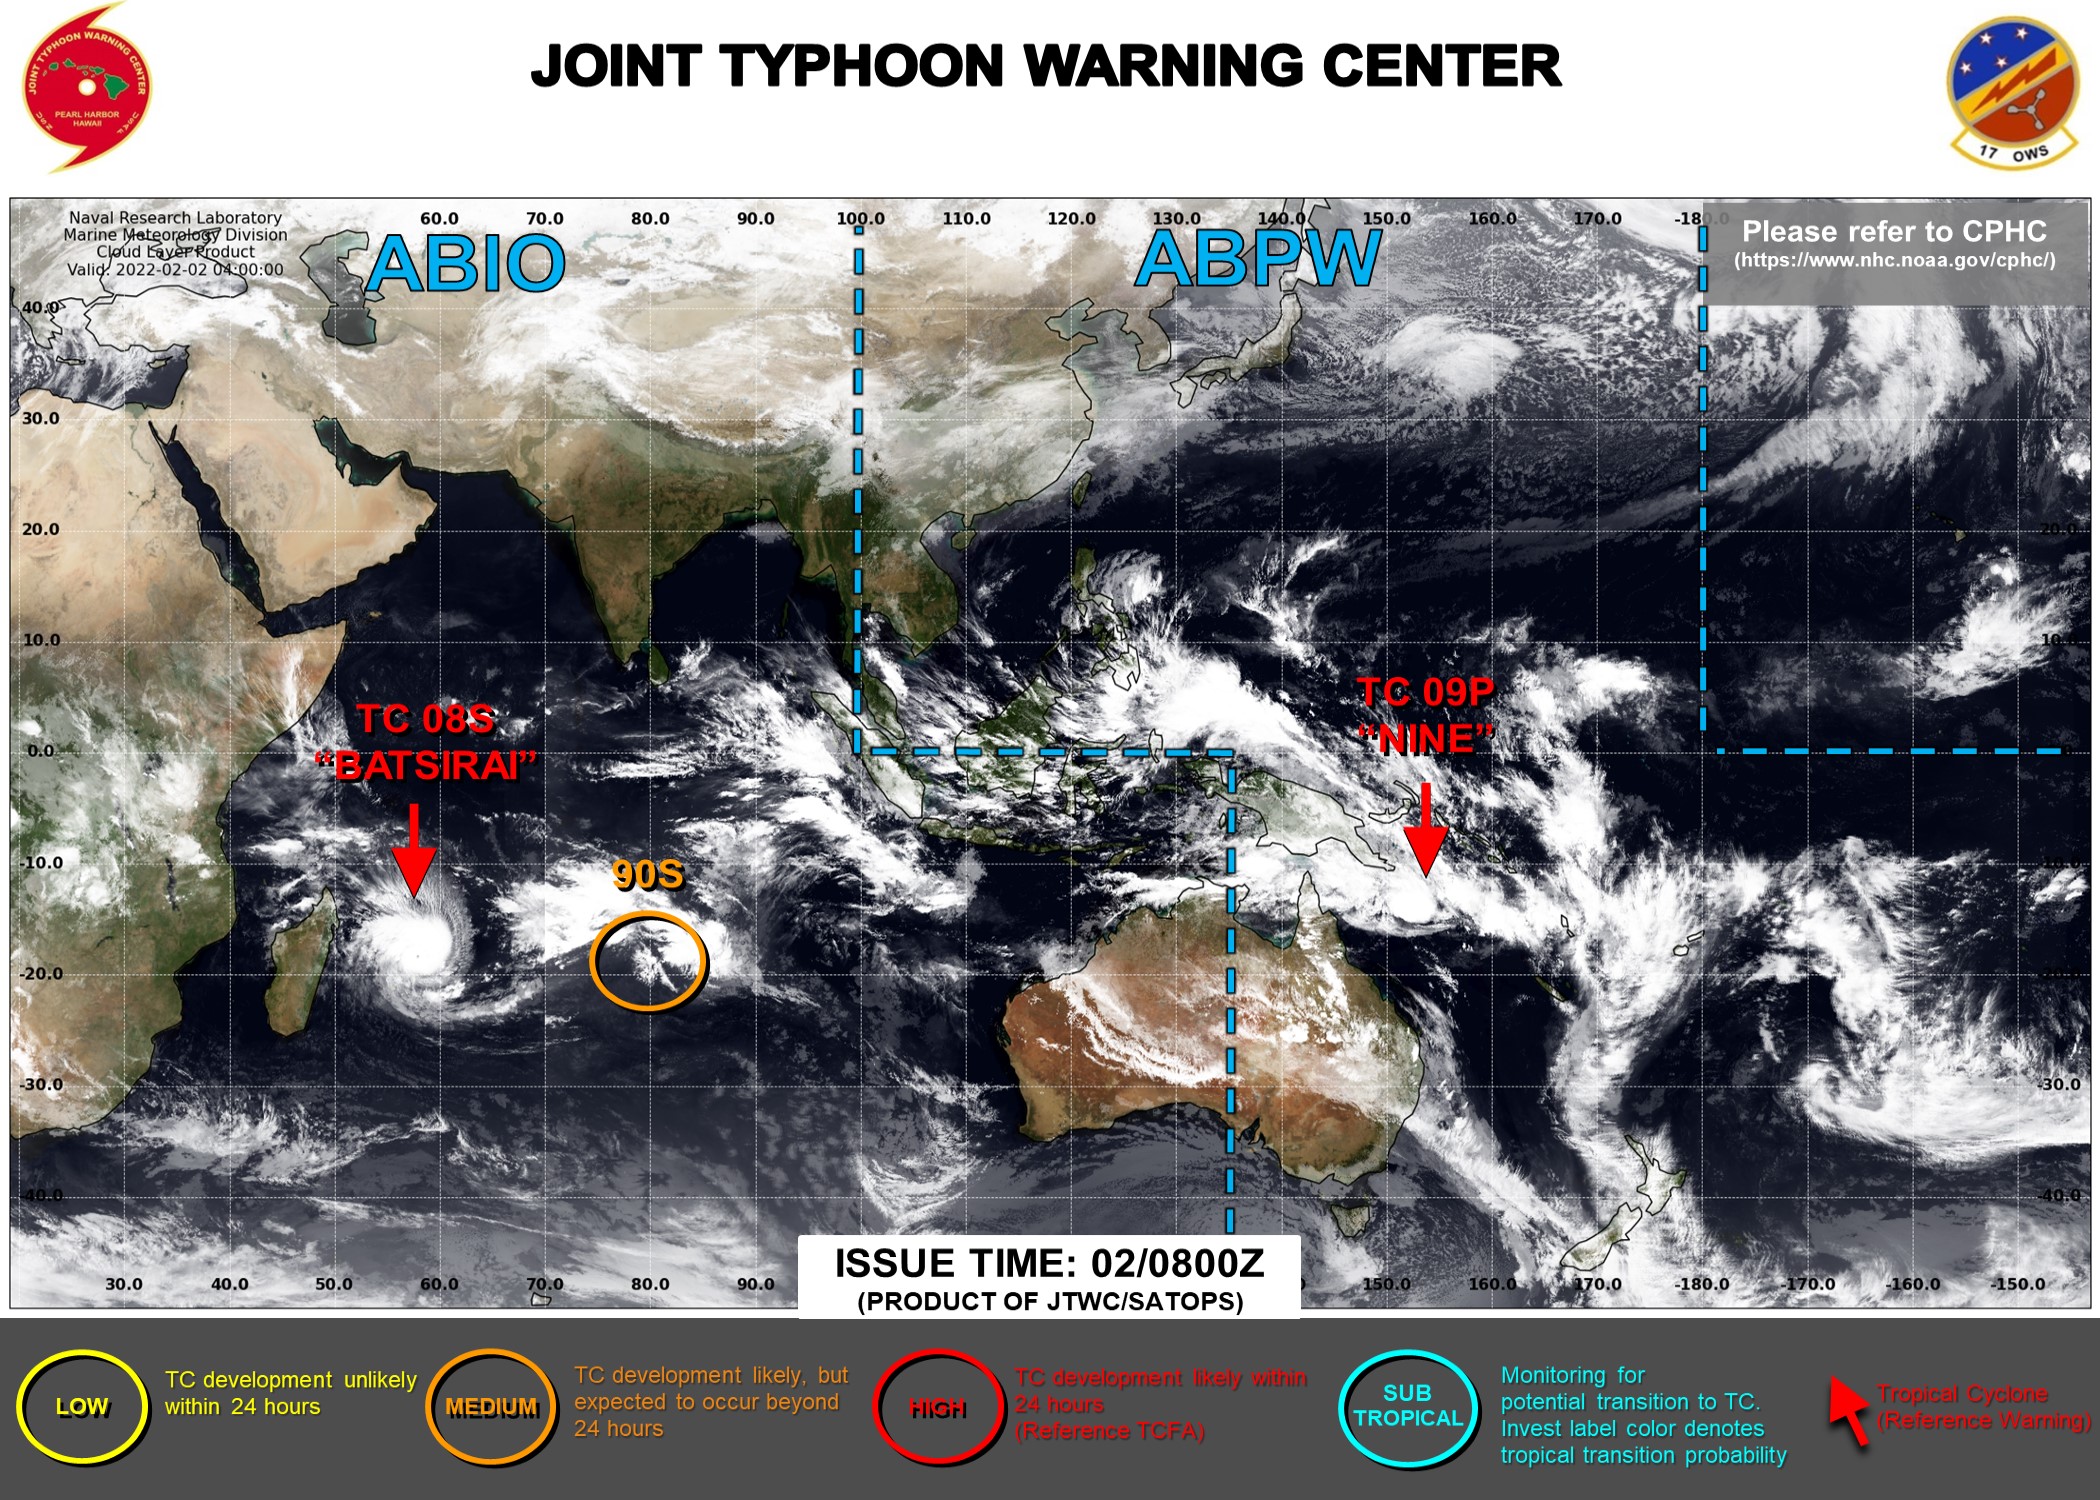 JTWC IS ISSUING 12HOURLY WARNINGS ON TC 08S(BATSIRAI) AND 6HOURLY WARNINGS ON TC 09P. 3HOURLY SATELLITE BULLETINS ARE ISSUED ON 08S, 09P AND INVEST 90S.